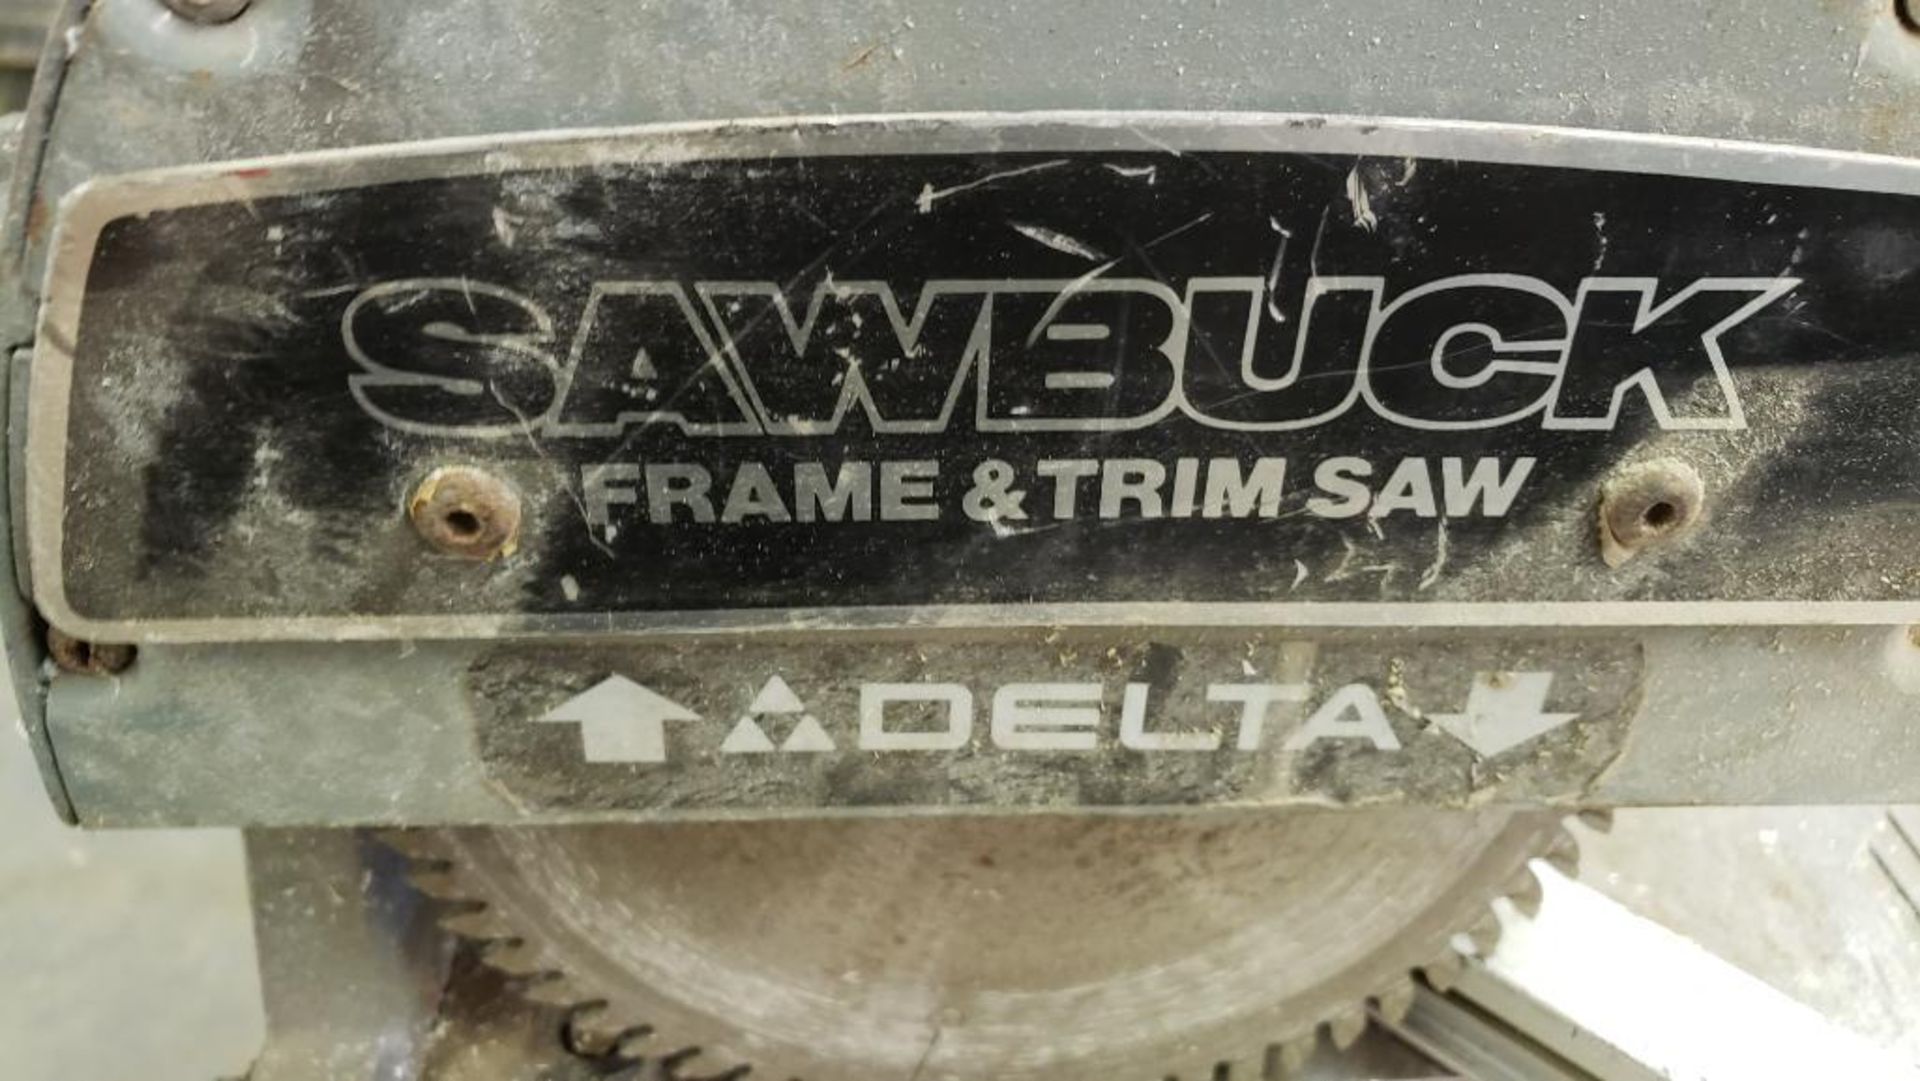 Delta frame and trim saw. Model Sawbuck. Includes stand. - Image 6 of 8